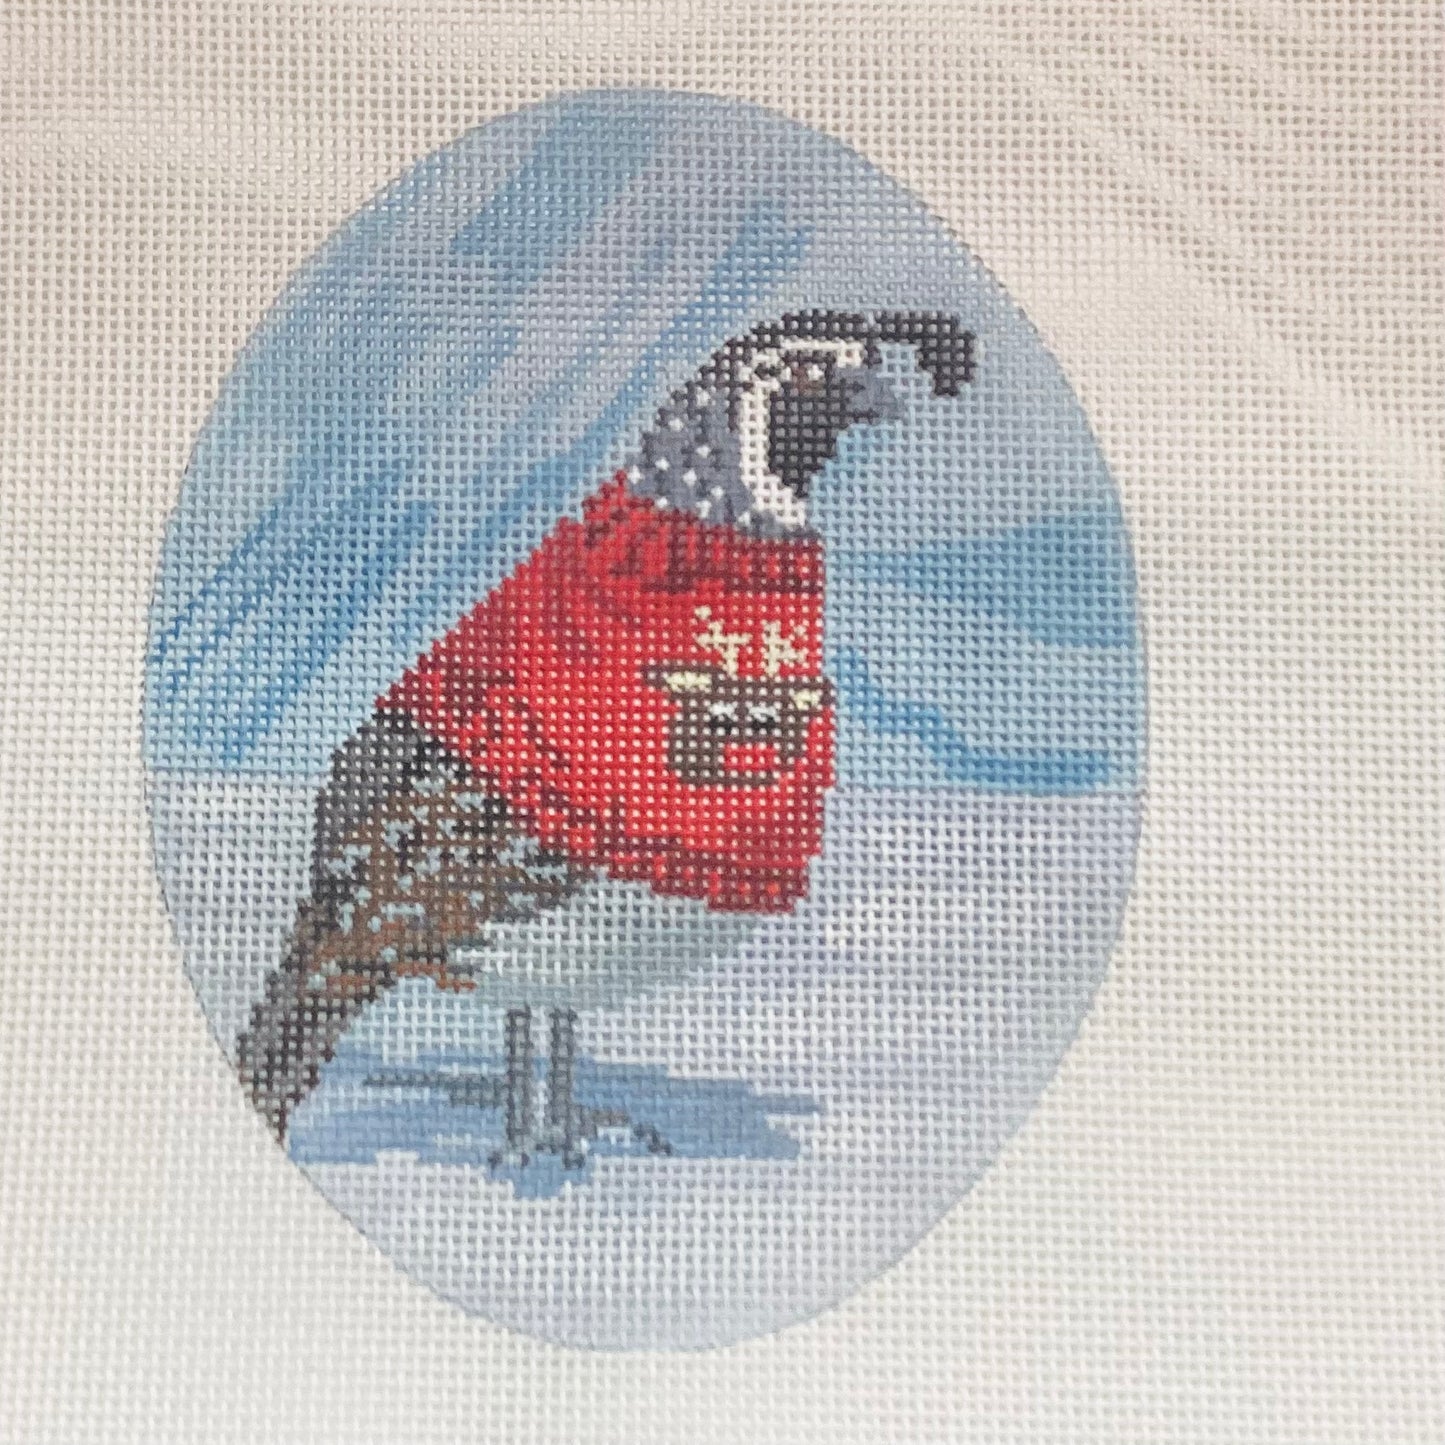 Christmas quail in sweater